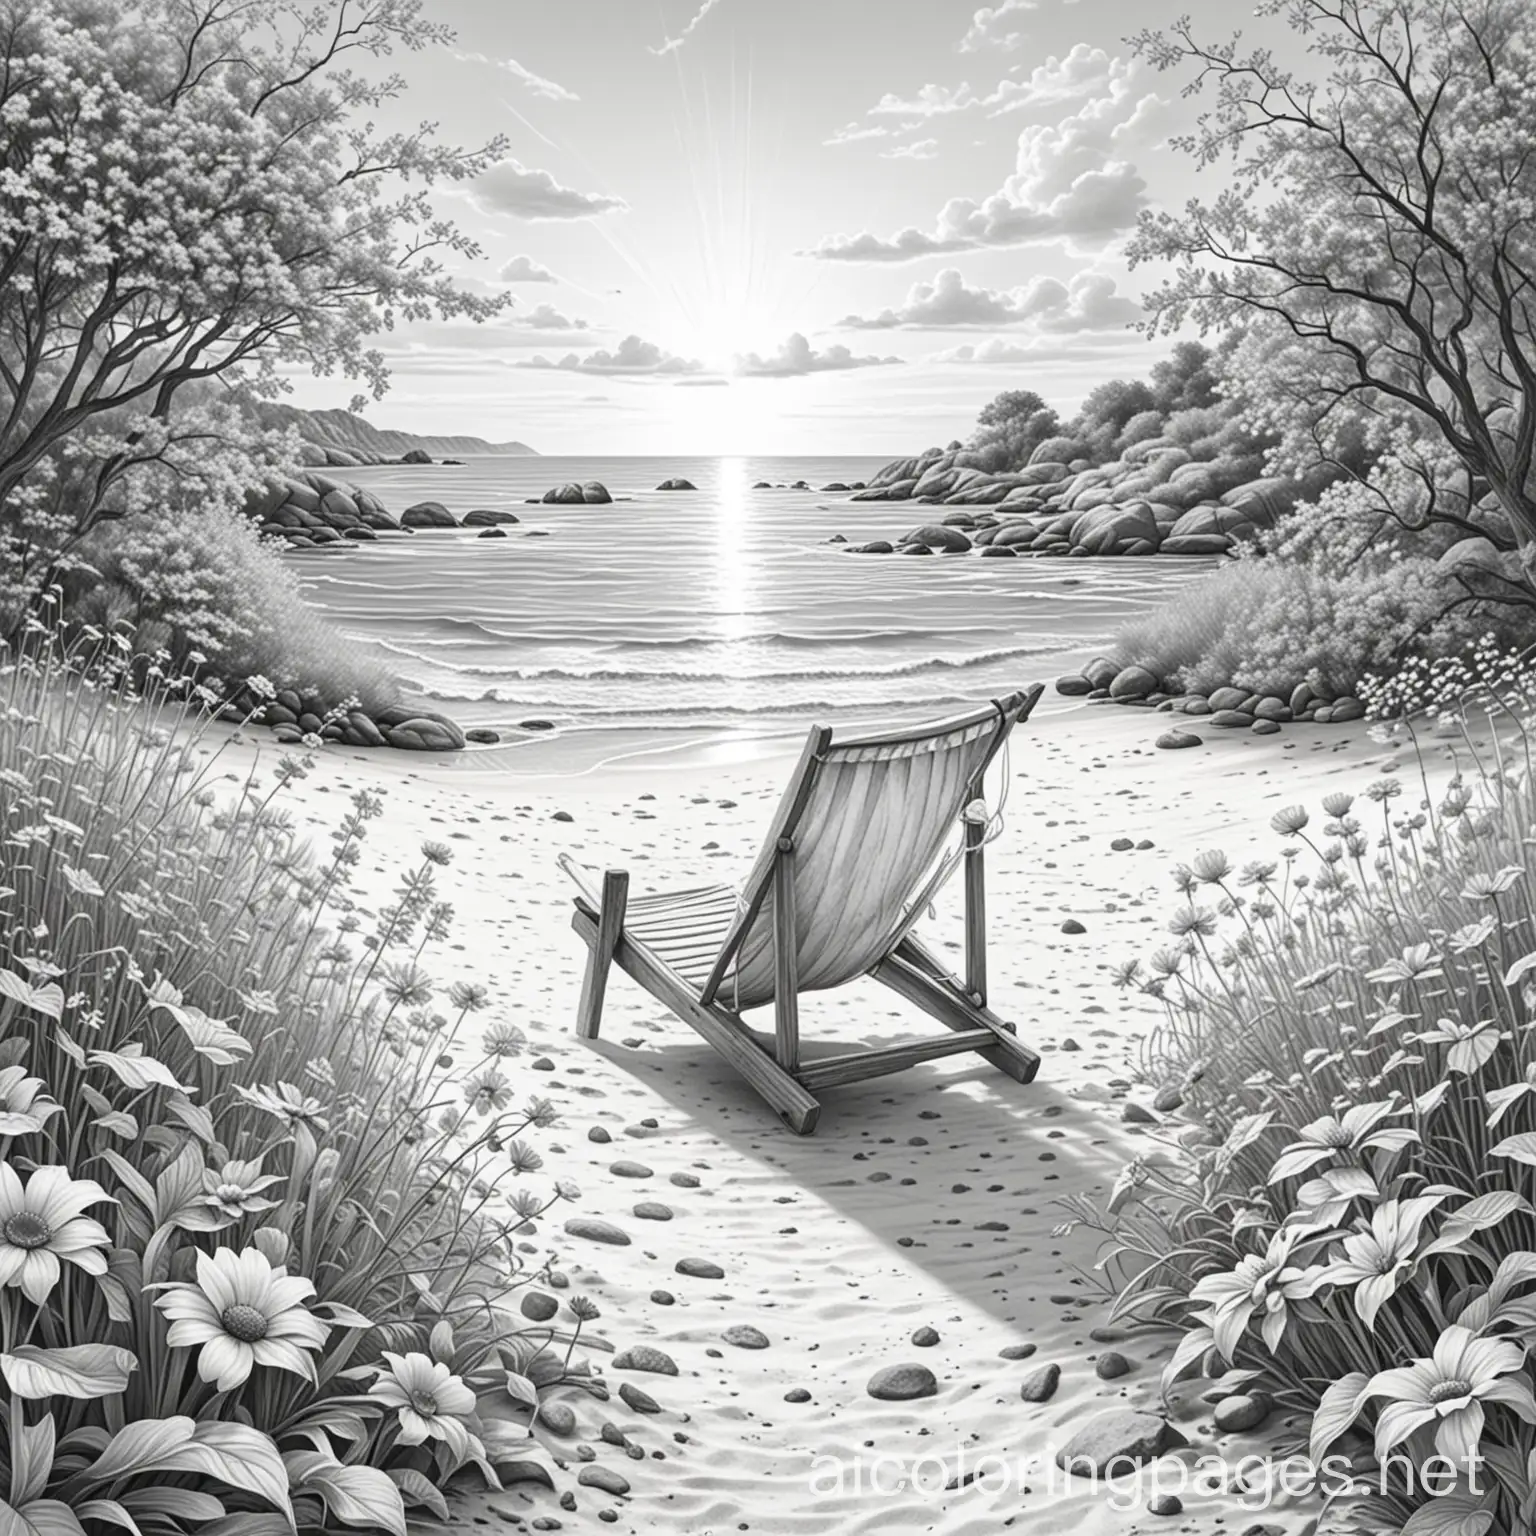 Grayscale-Summertime-Coloring-Page-with-Simplicity-and-Ample-White-Space